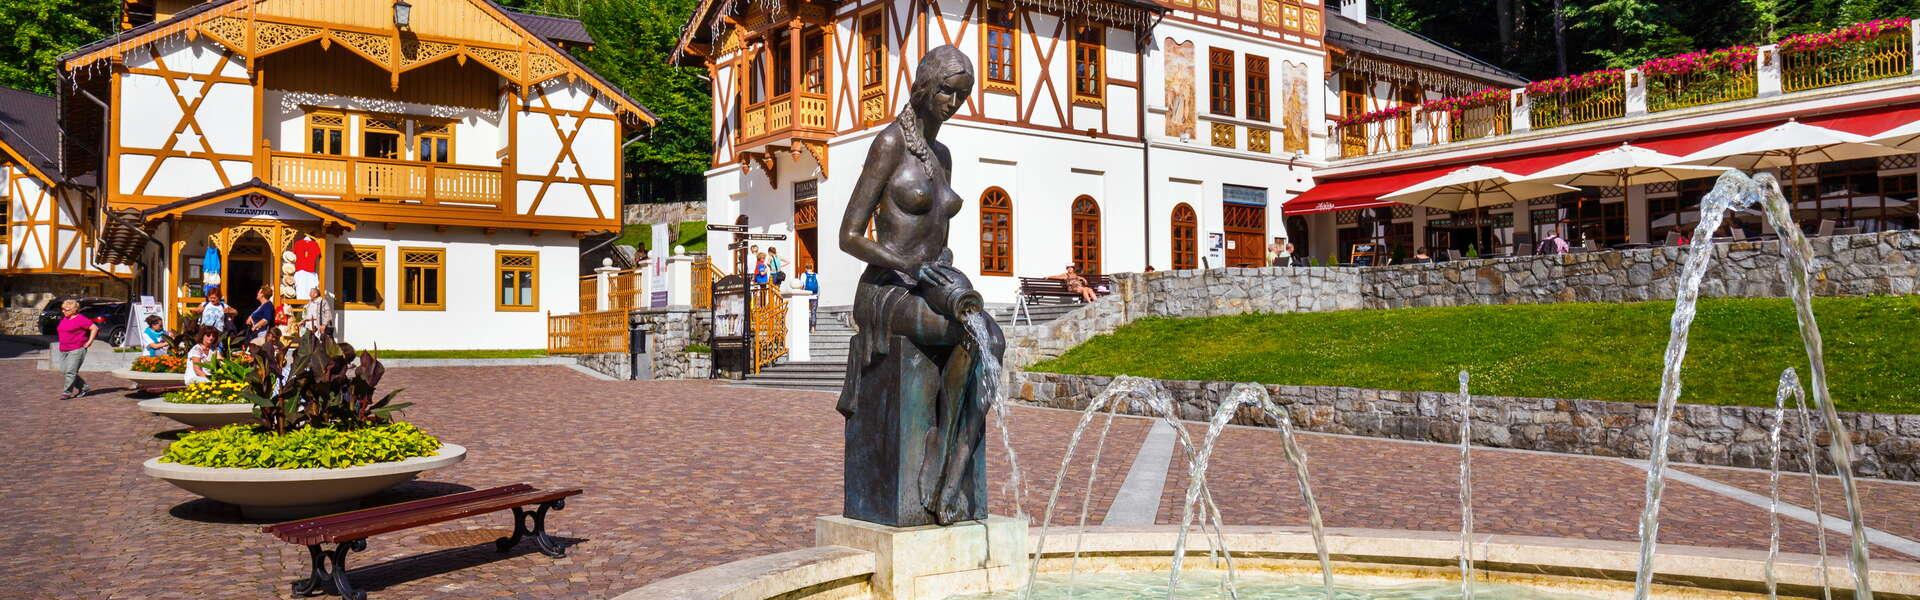 A view of the fountain with a sculpture of a woman. Wooden historic buildings in the background.